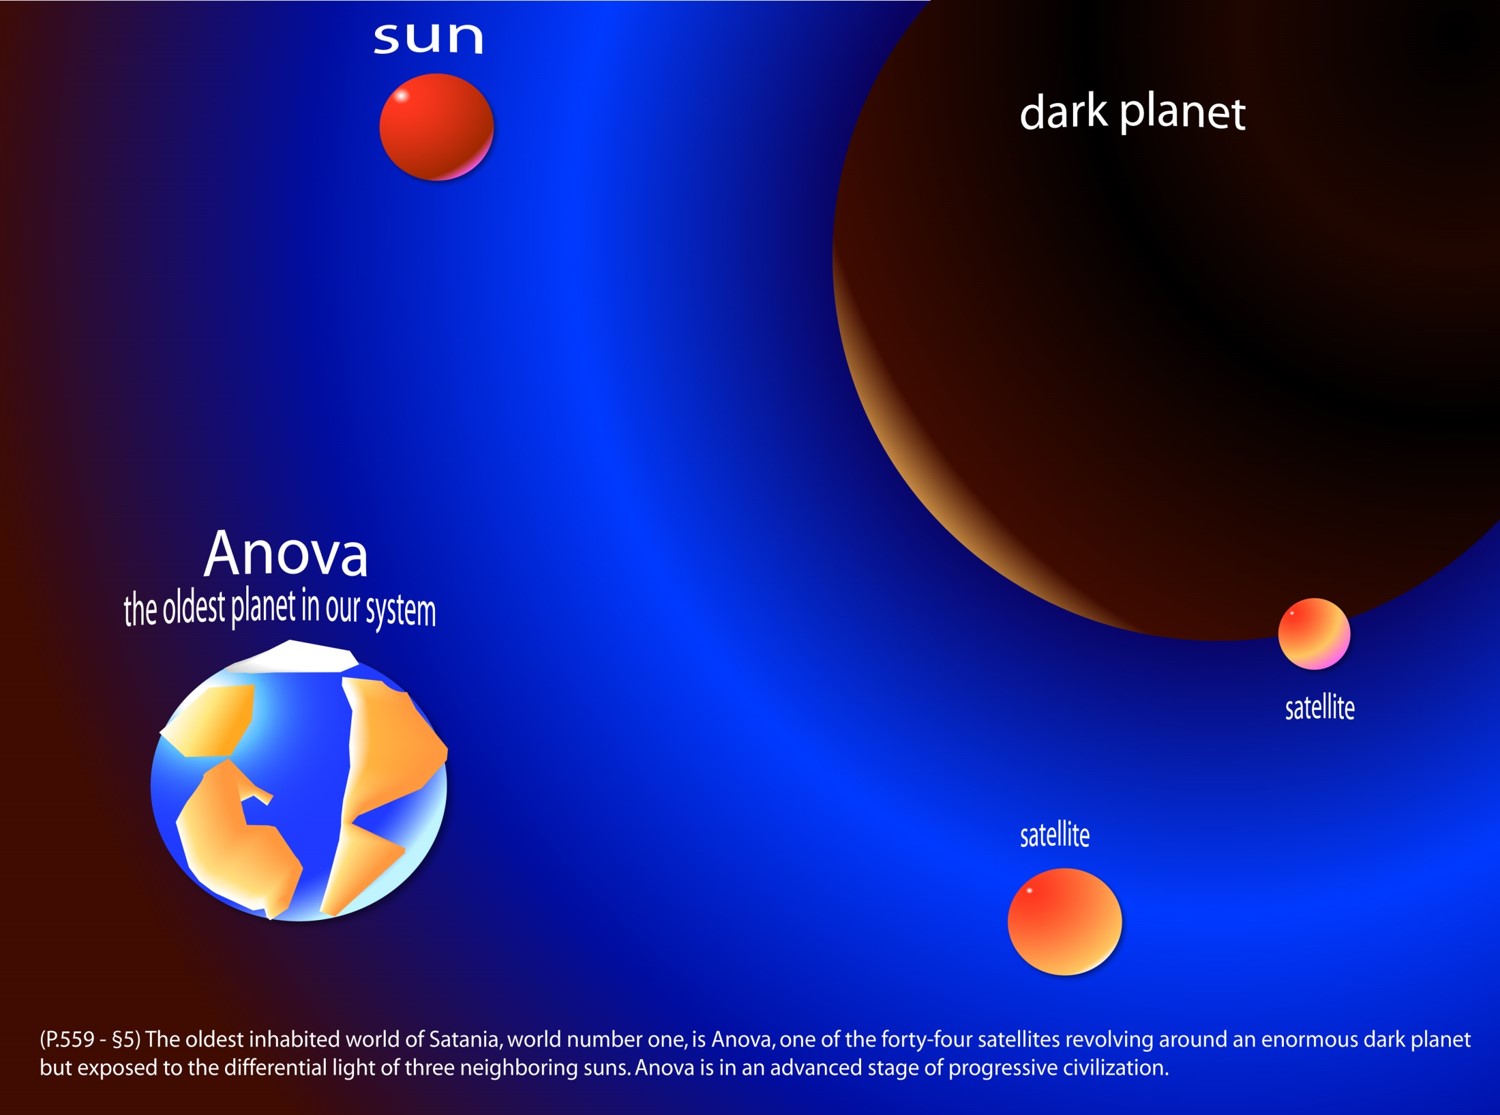 Anova the oldest planet